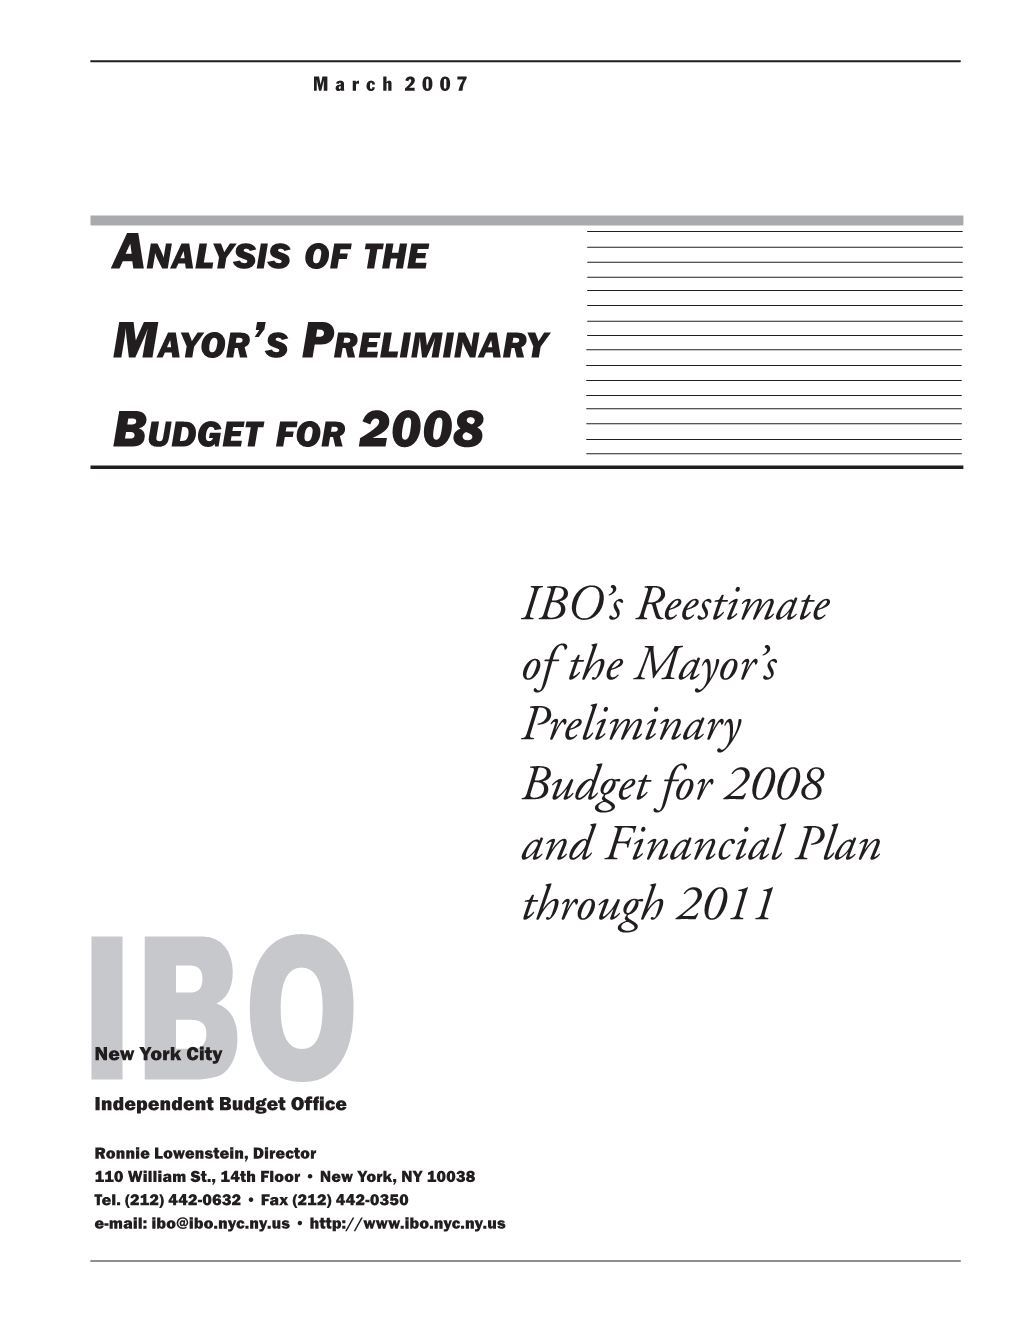 Analysis of the Mayor's Preliminary Budget for 2008 and Financial Plan